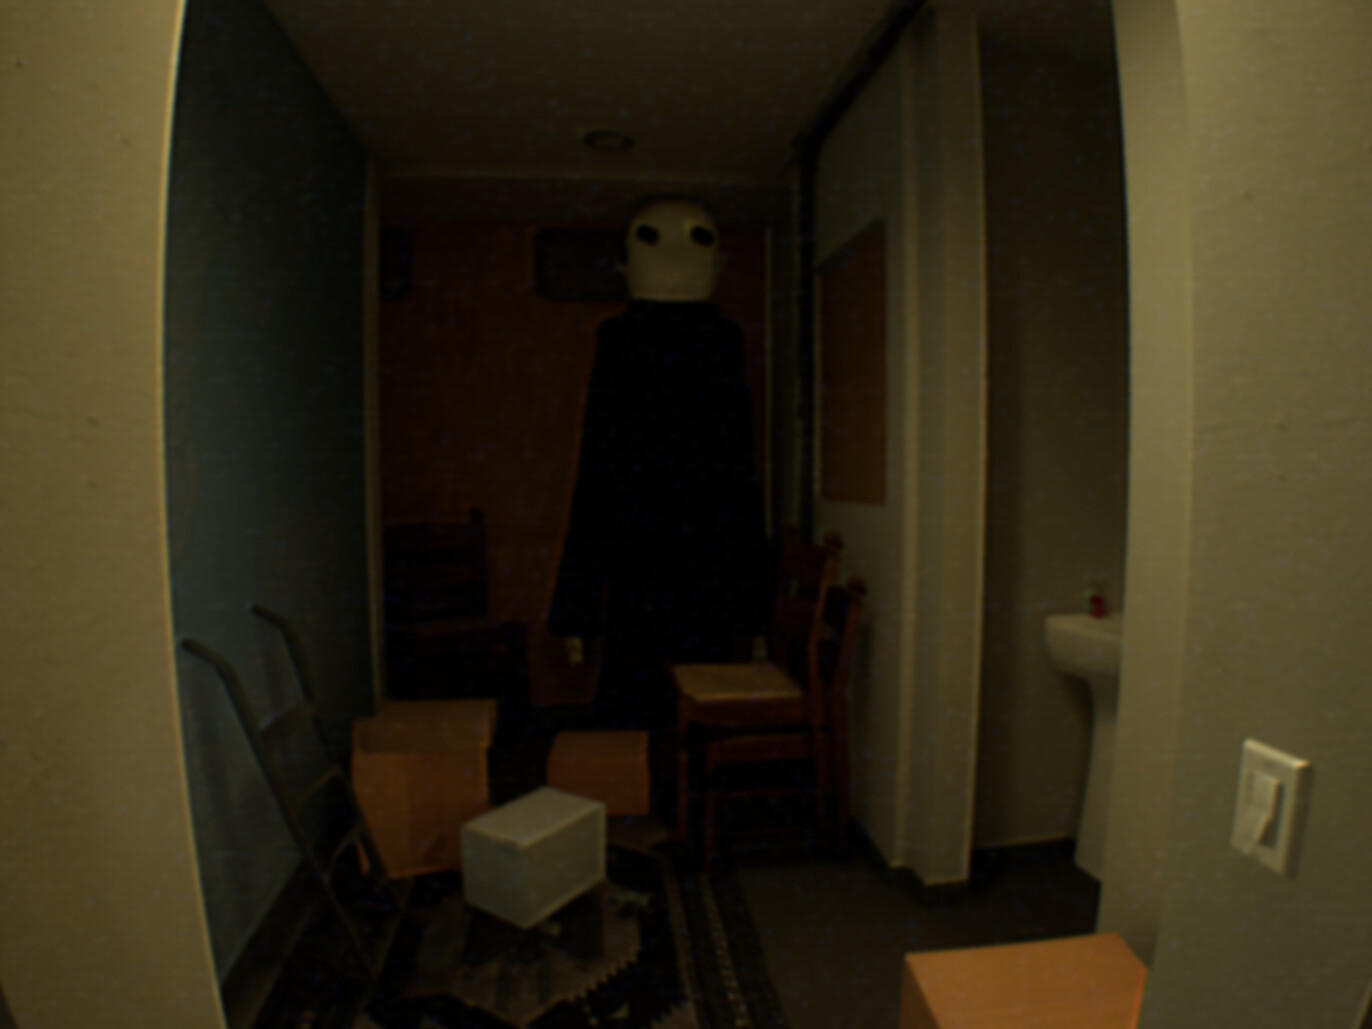 SCP-173 in The Backrooms (found footage) 